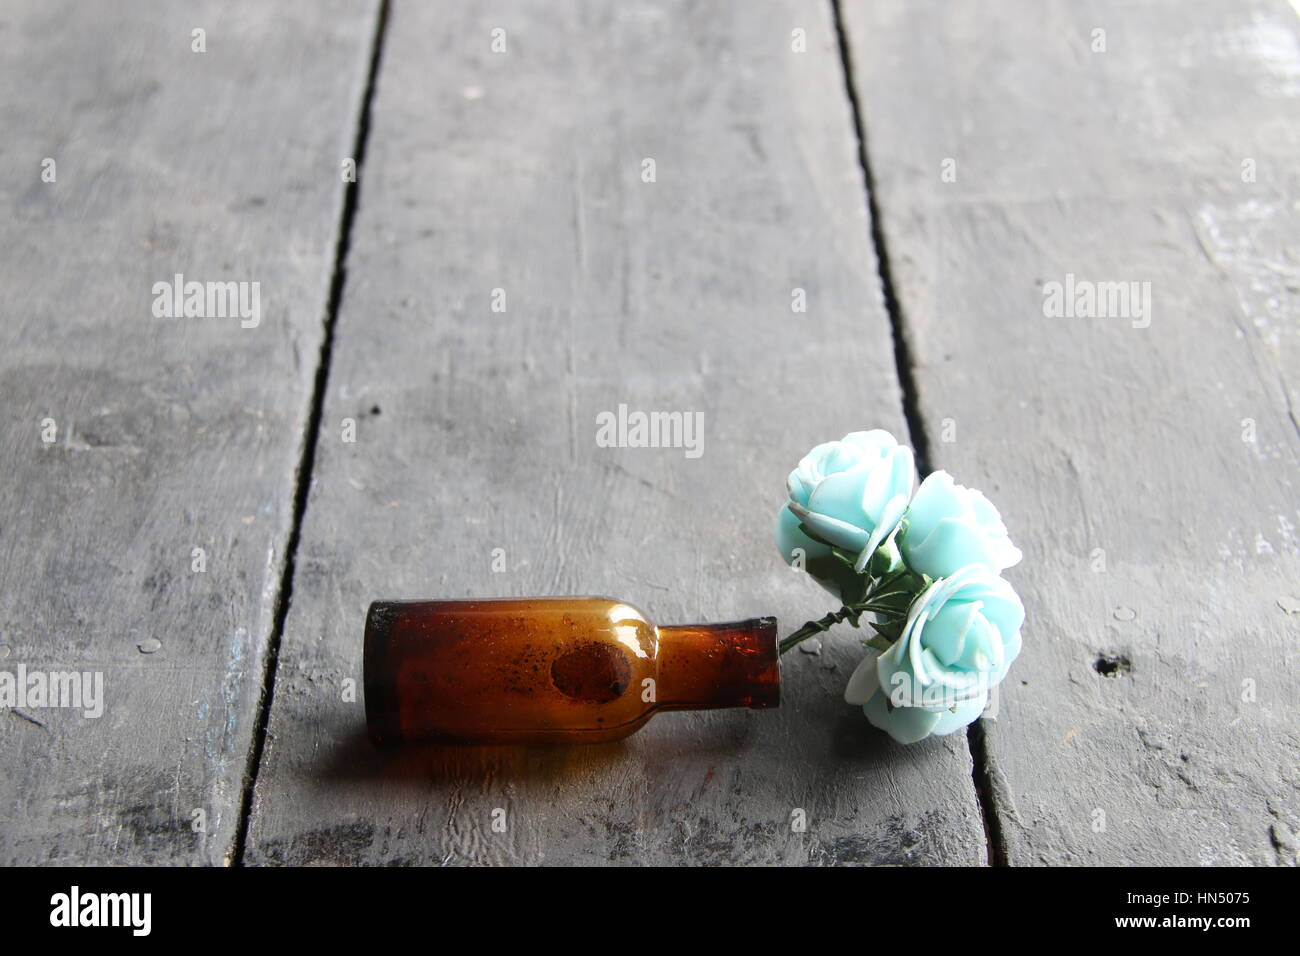 flowers in a in old vintage bottle Stock Photo